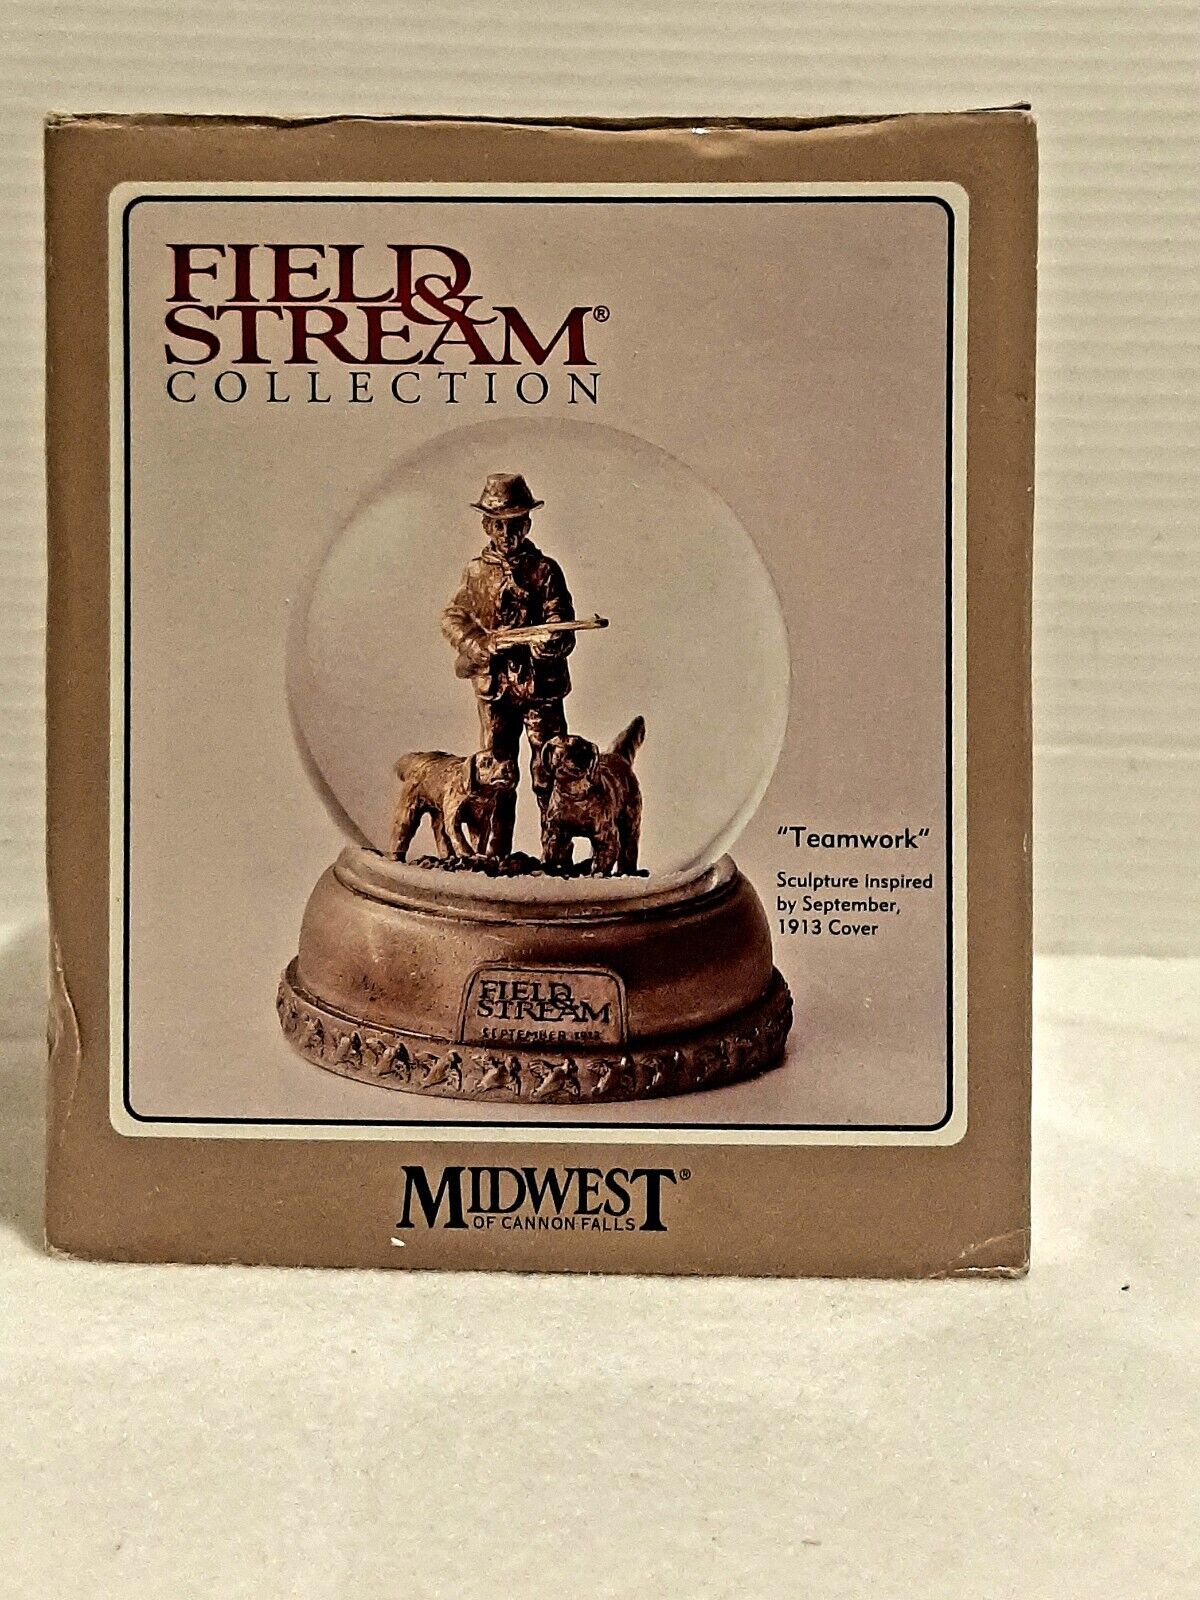 Field And Stream Collection Snow Globe Teamwork 1996 Midwest of Cannon Falls 